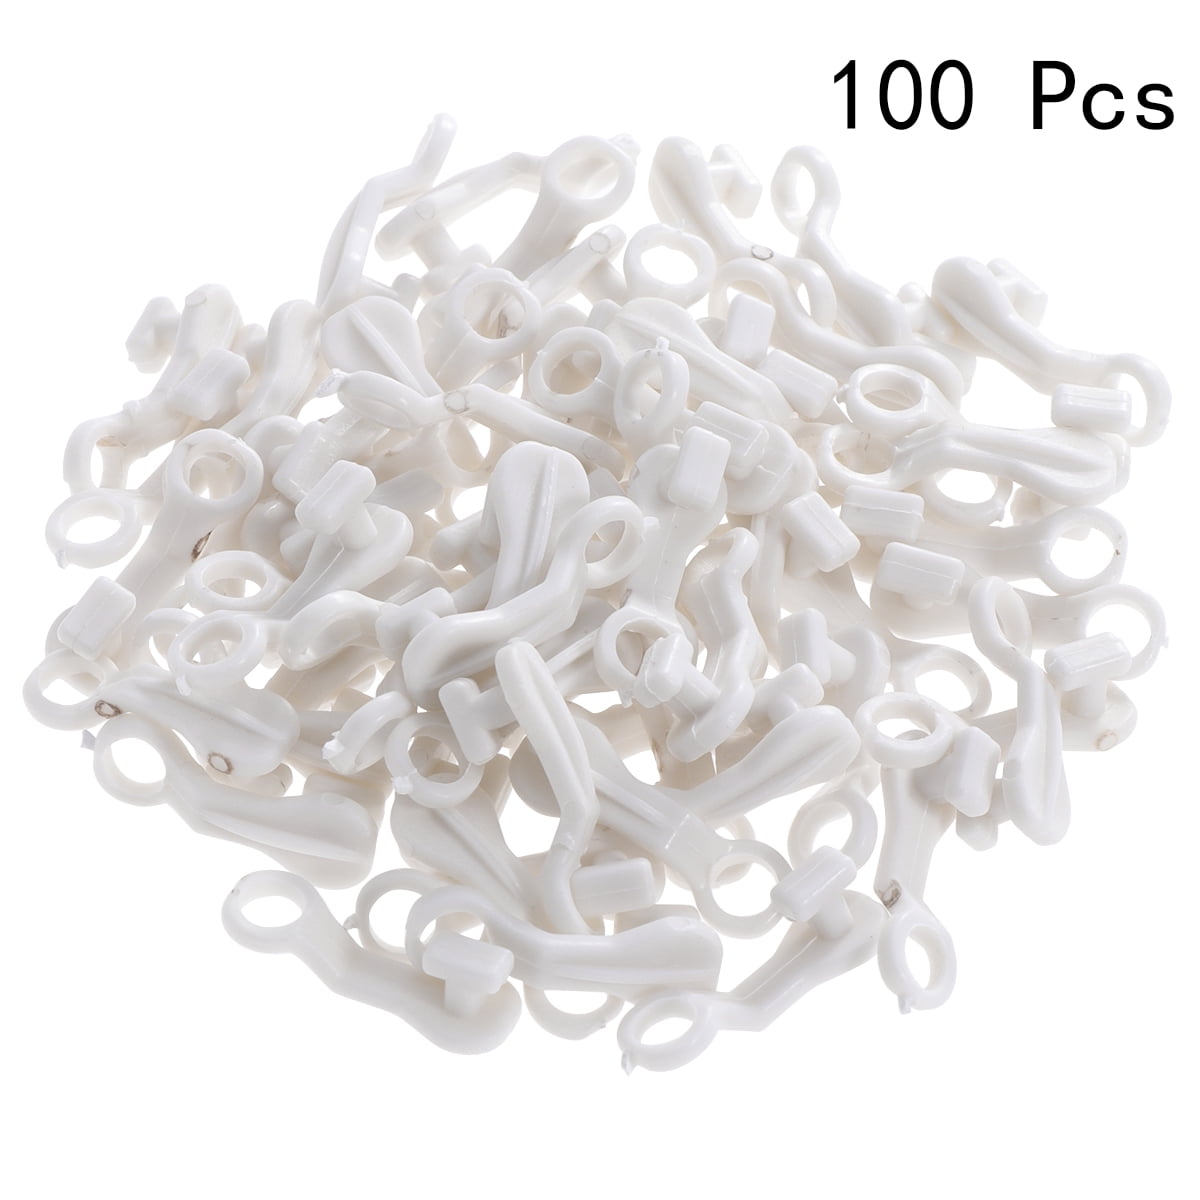 100 x CURTAIN HOOKS FOR CURTAINS WHITE PLASTIC NYLON POLE HOOK RAIL GLIDERS PACK 